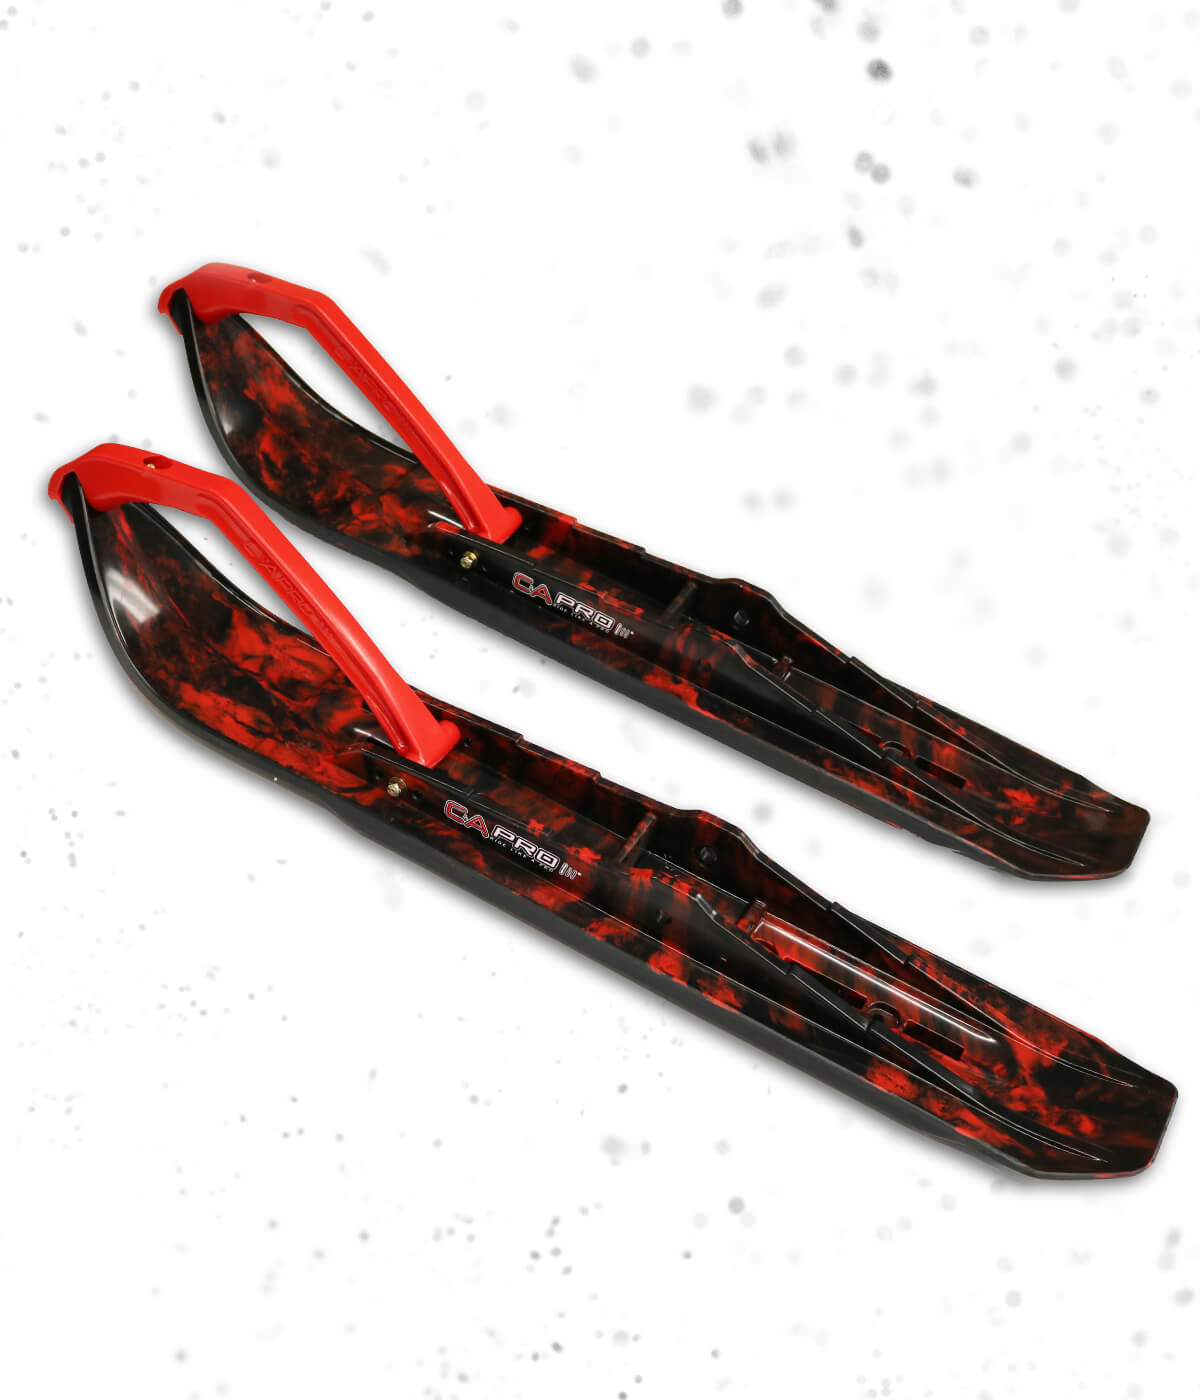 C&A Pro custom XCS crossover skis with black base, red accent and red handles